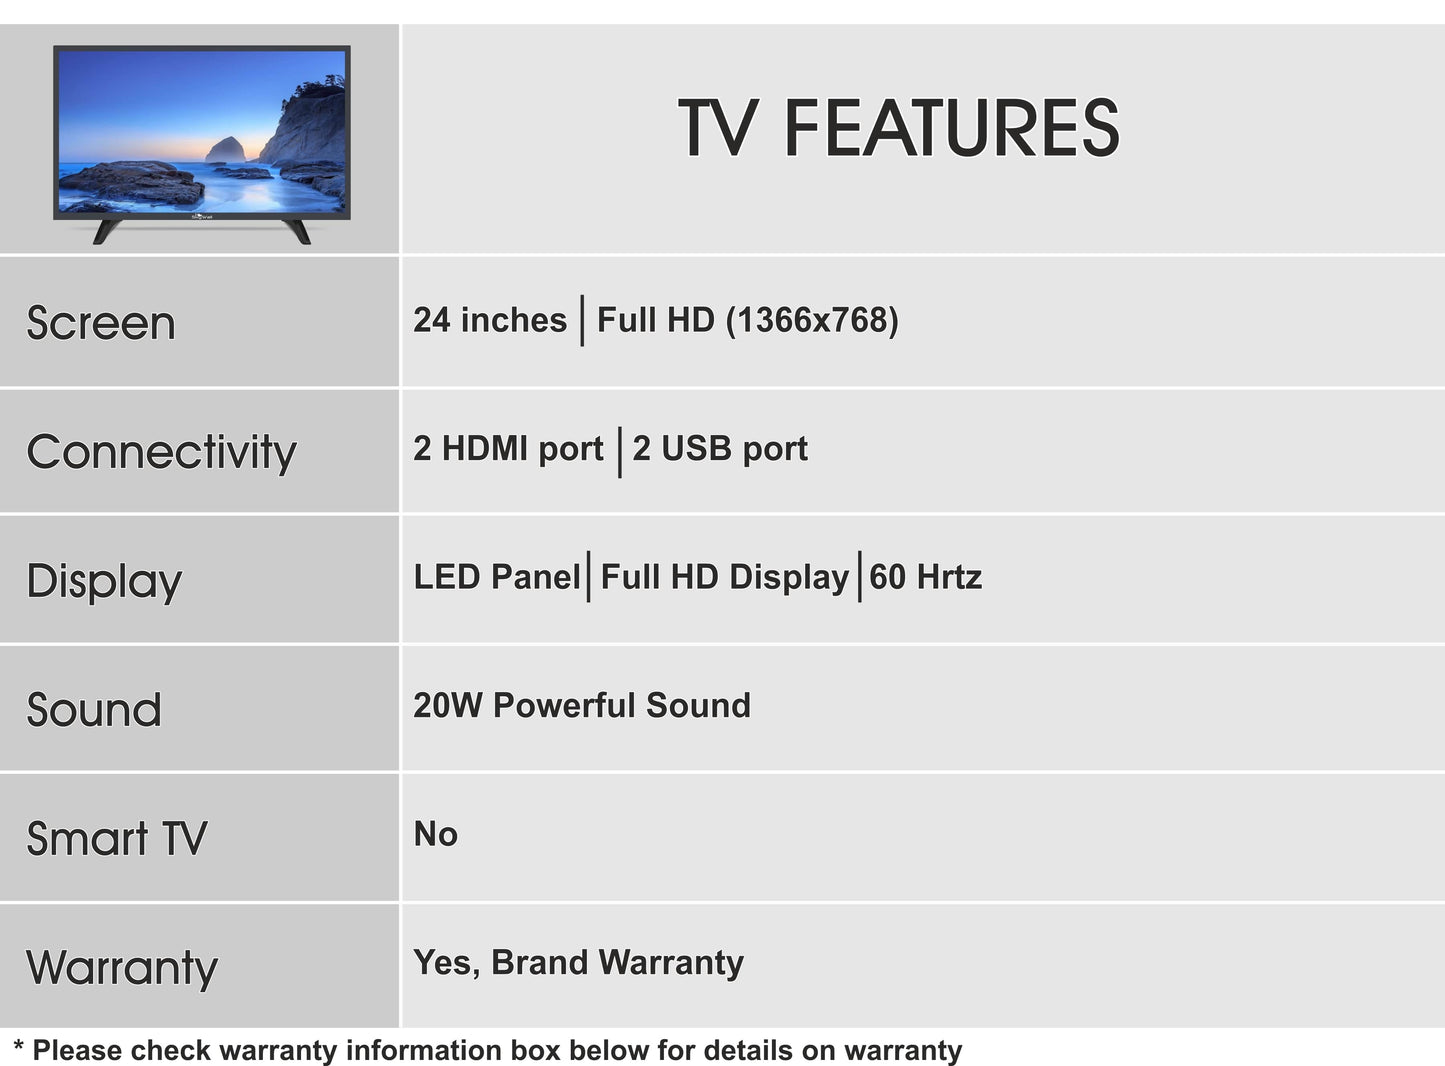 SkyWall 60.96 cm 24 inch HD Ready LED TV 24SWATV With A Grade Panel slim bezels